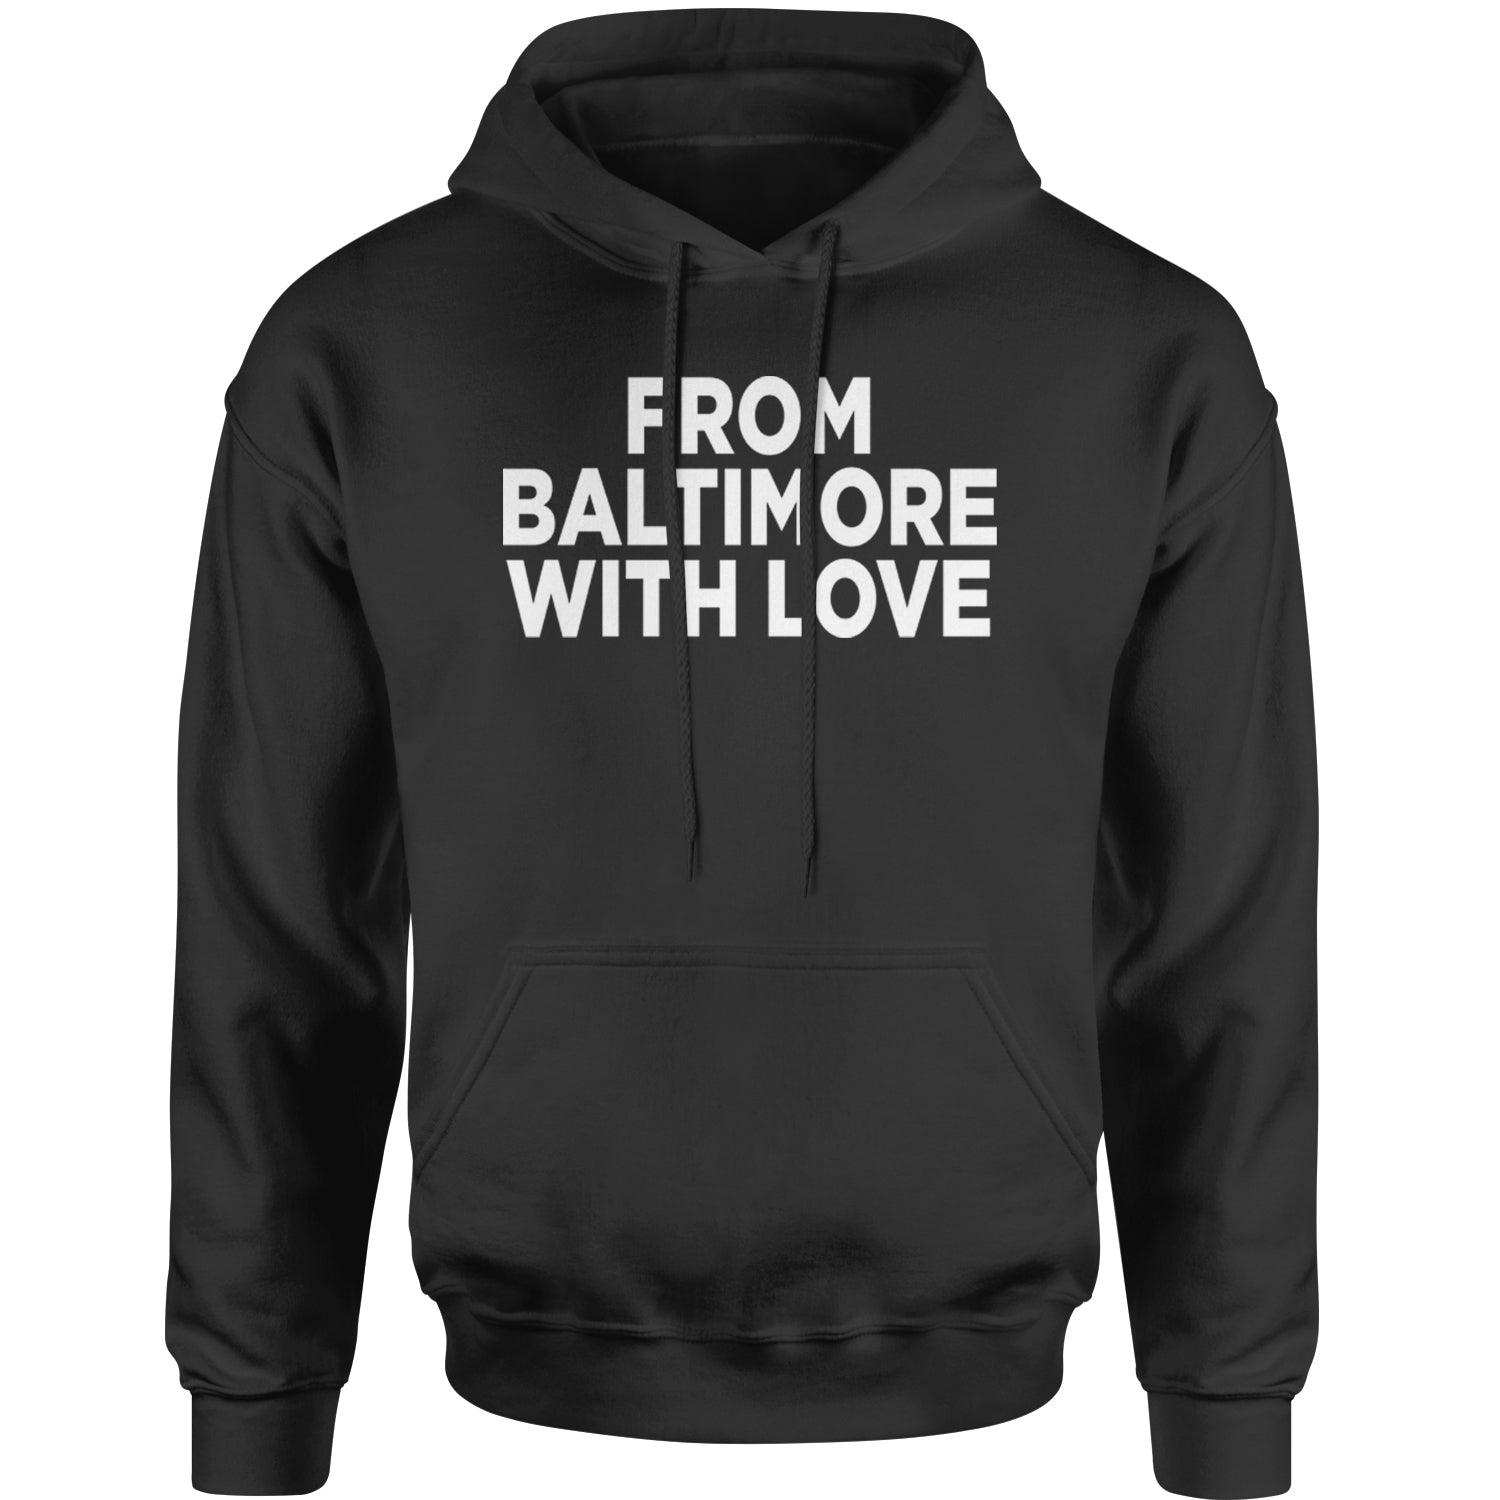 From Baltimore With Love Adult Hoodie Sweatshirt